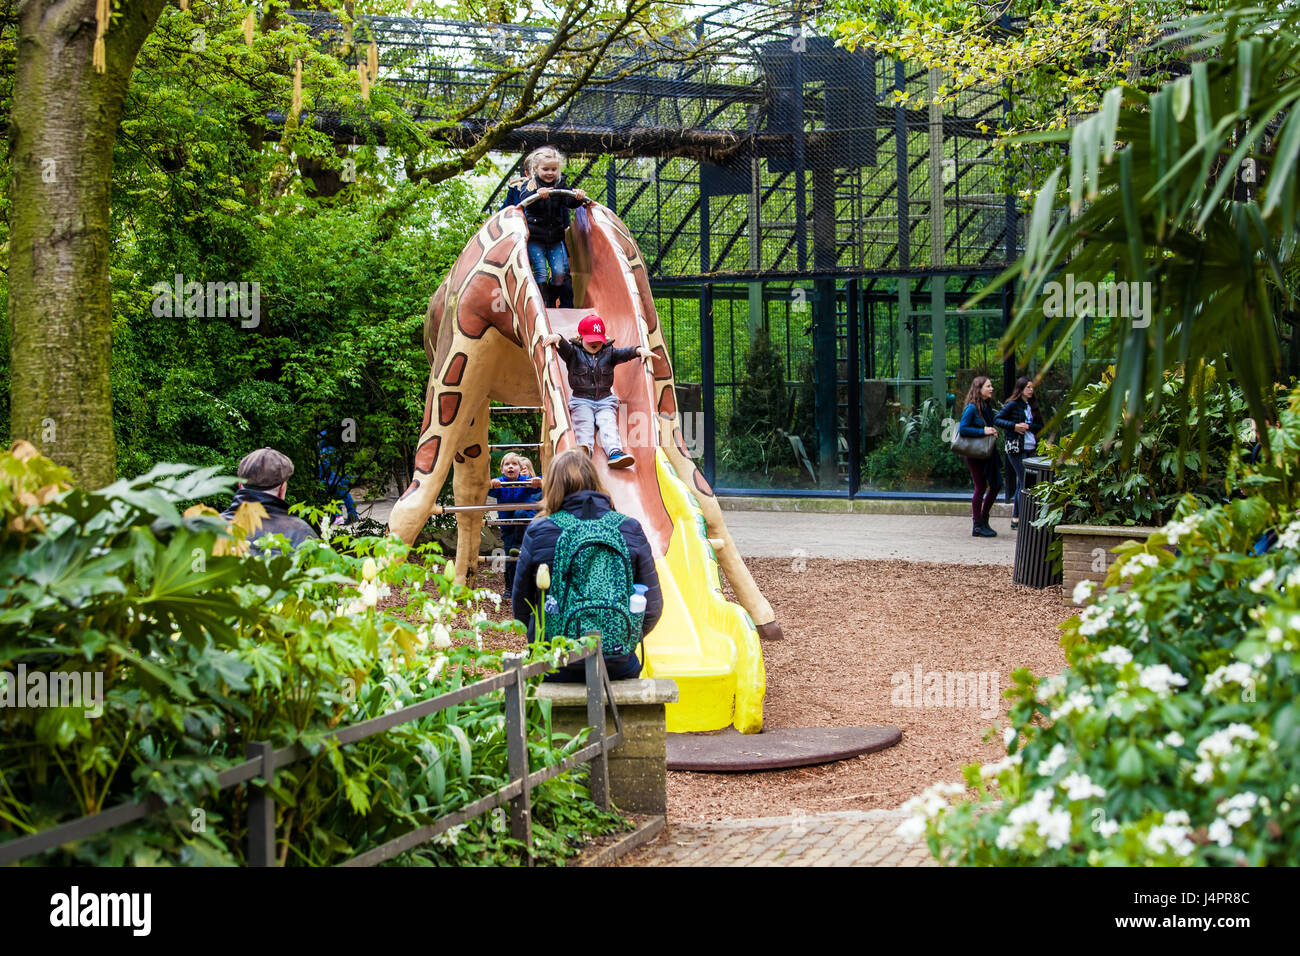 Amsterdam, Pays-Bas - Avril, 2017 : Kids in Amsterdam City Zoo, Pays-Bas Banque D'Images